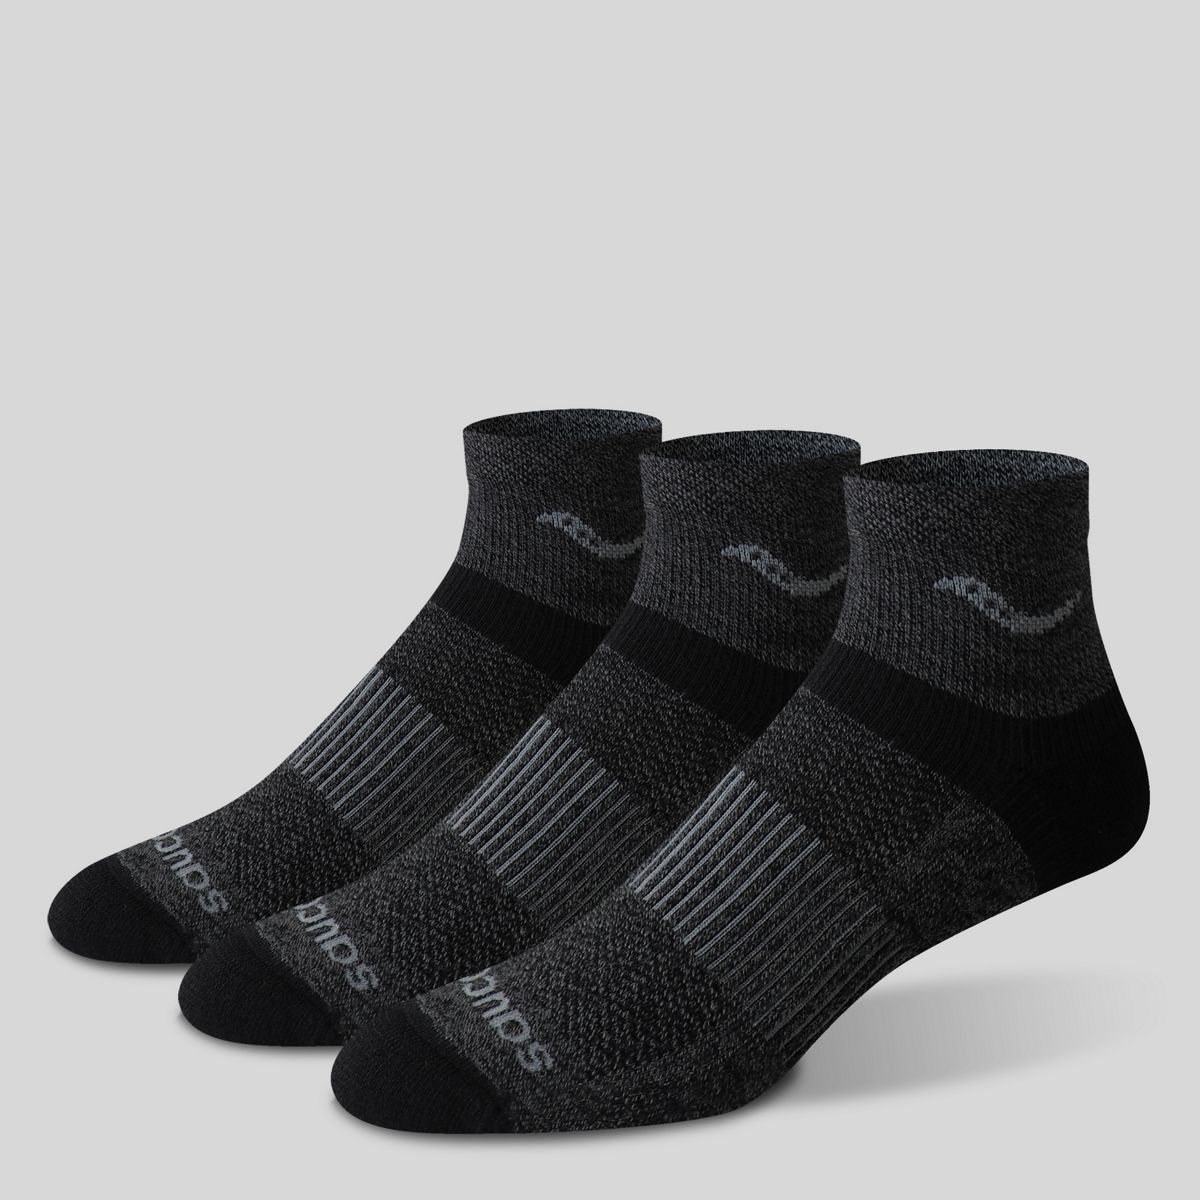 Meia On Running Low Sock Masculino Cinza-Escuro - Shoestation